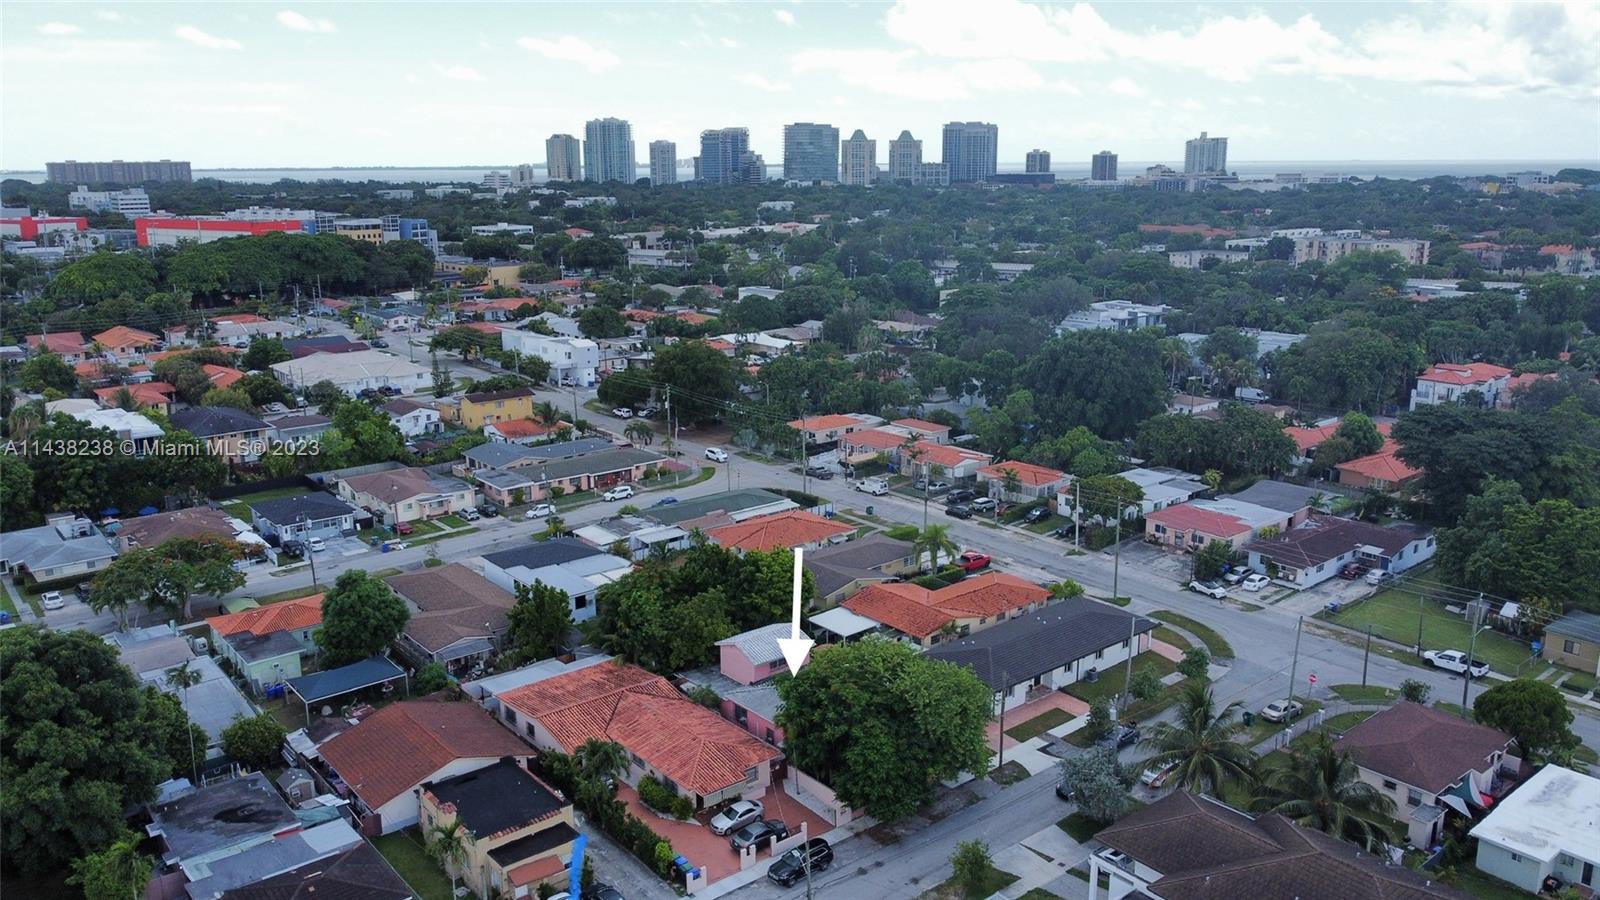 Calling to Investors for this great opportunity to own a property/land Zoned  5700/DUPLEXES - GENERAL. Currently a 3/2  being sold for land value. Amazing location blocks from Coral Gables, US-1, the metro mover and within minutes to the airport & downtown.